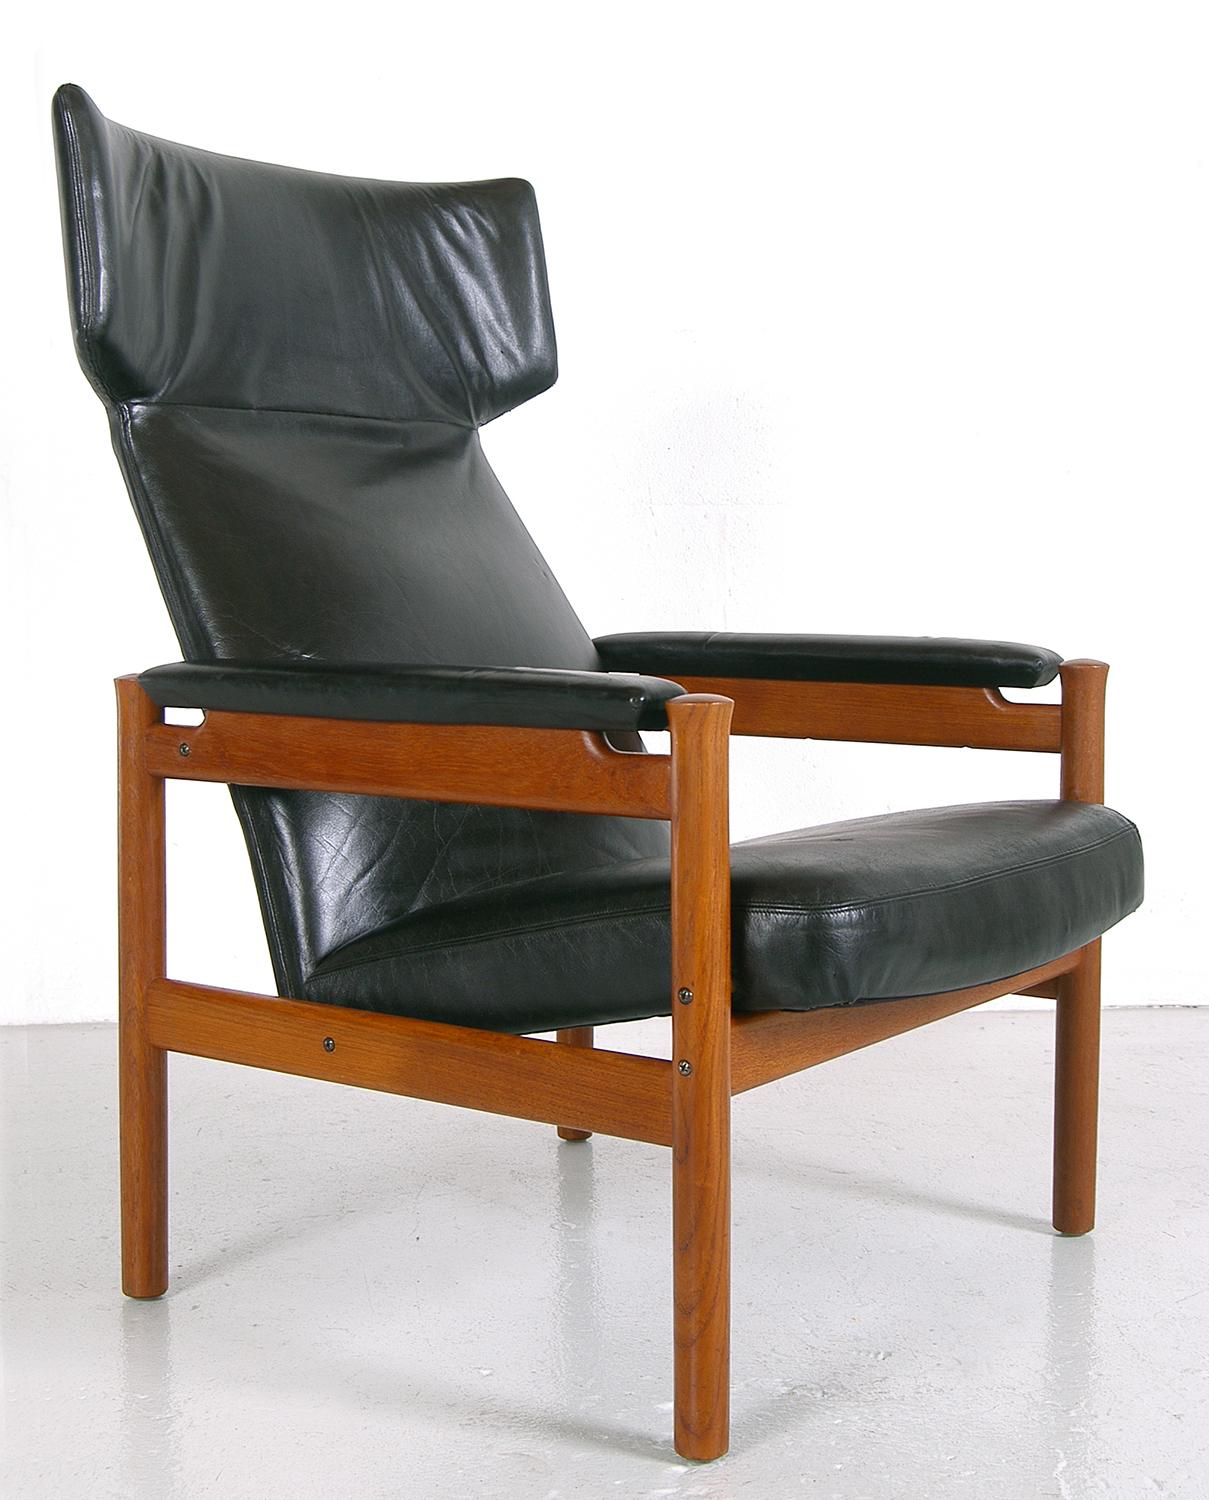 A super stylish 1960s model ‘4365’ Wingback chair designed by Soren Hansen for Fritz Hansen, Denmark. The chair features a solid teak frame, which is in good clean original condition and is structurally sound. The chair has its original silver Fritz